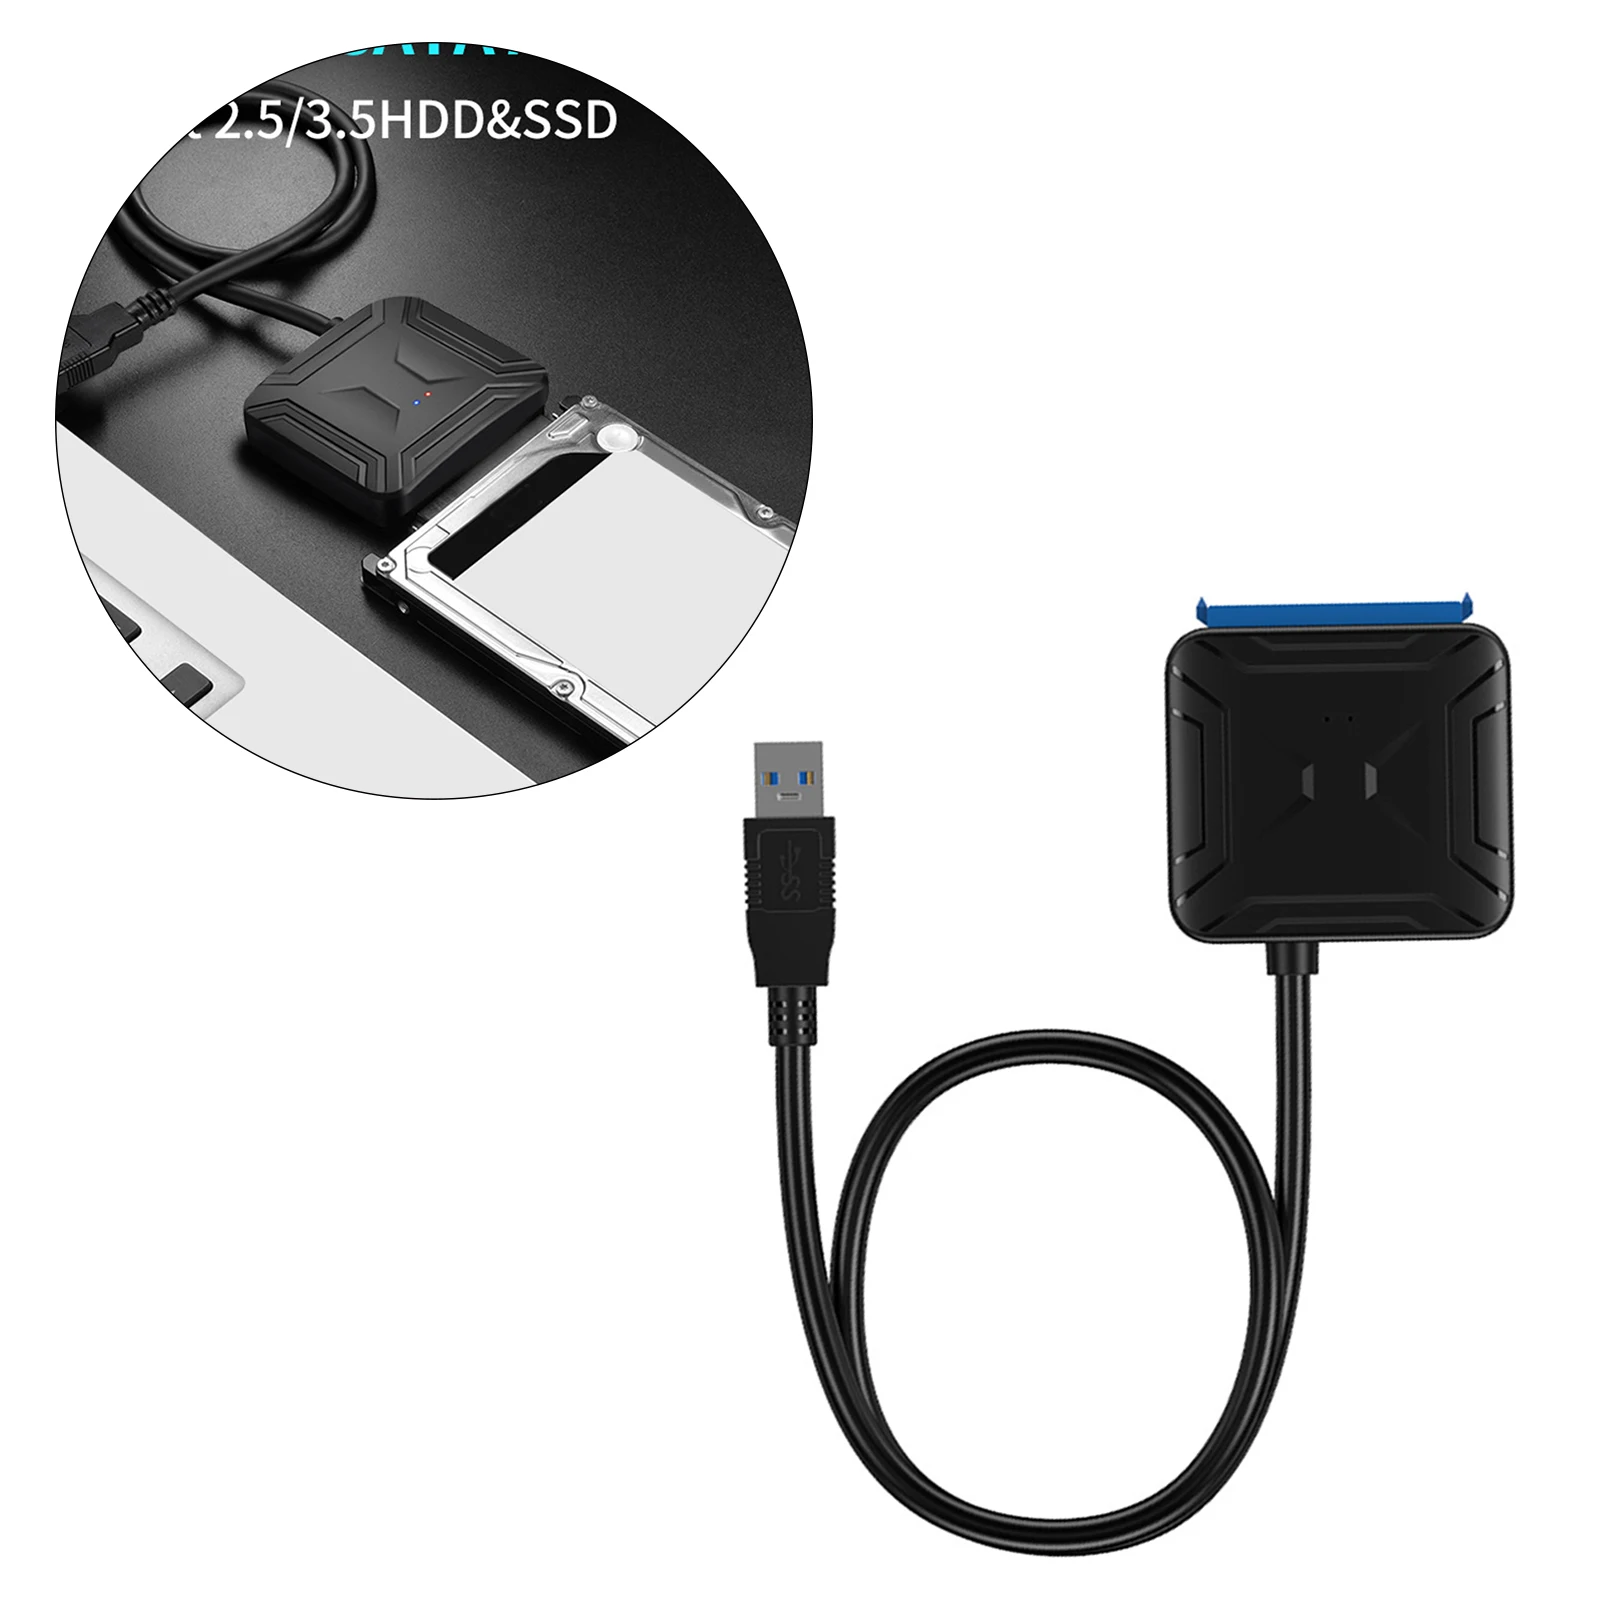 SATA to USB 3.0 Adapter Cable for 3.5 2.5 Inch SSD HDD with 12V Power Adapter External Converter for SSD/HDD Data Transfer